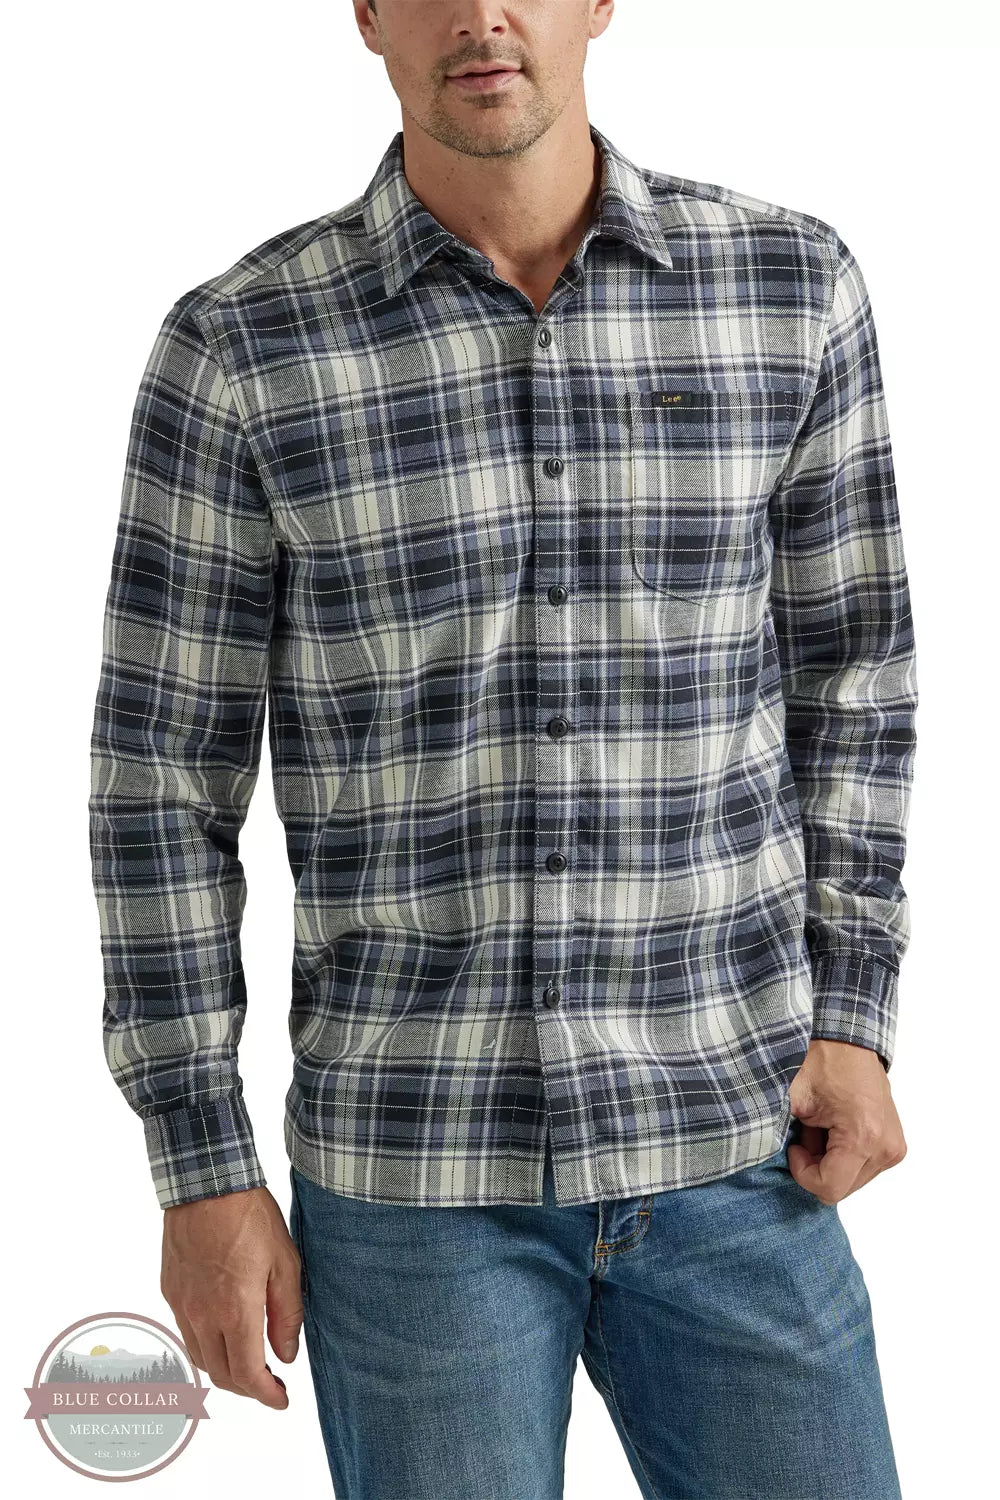 Lee 112339789 Extreme Motion All Purpose Button Down Long Sleeve Shirt in Unionall Black Plaid Front View